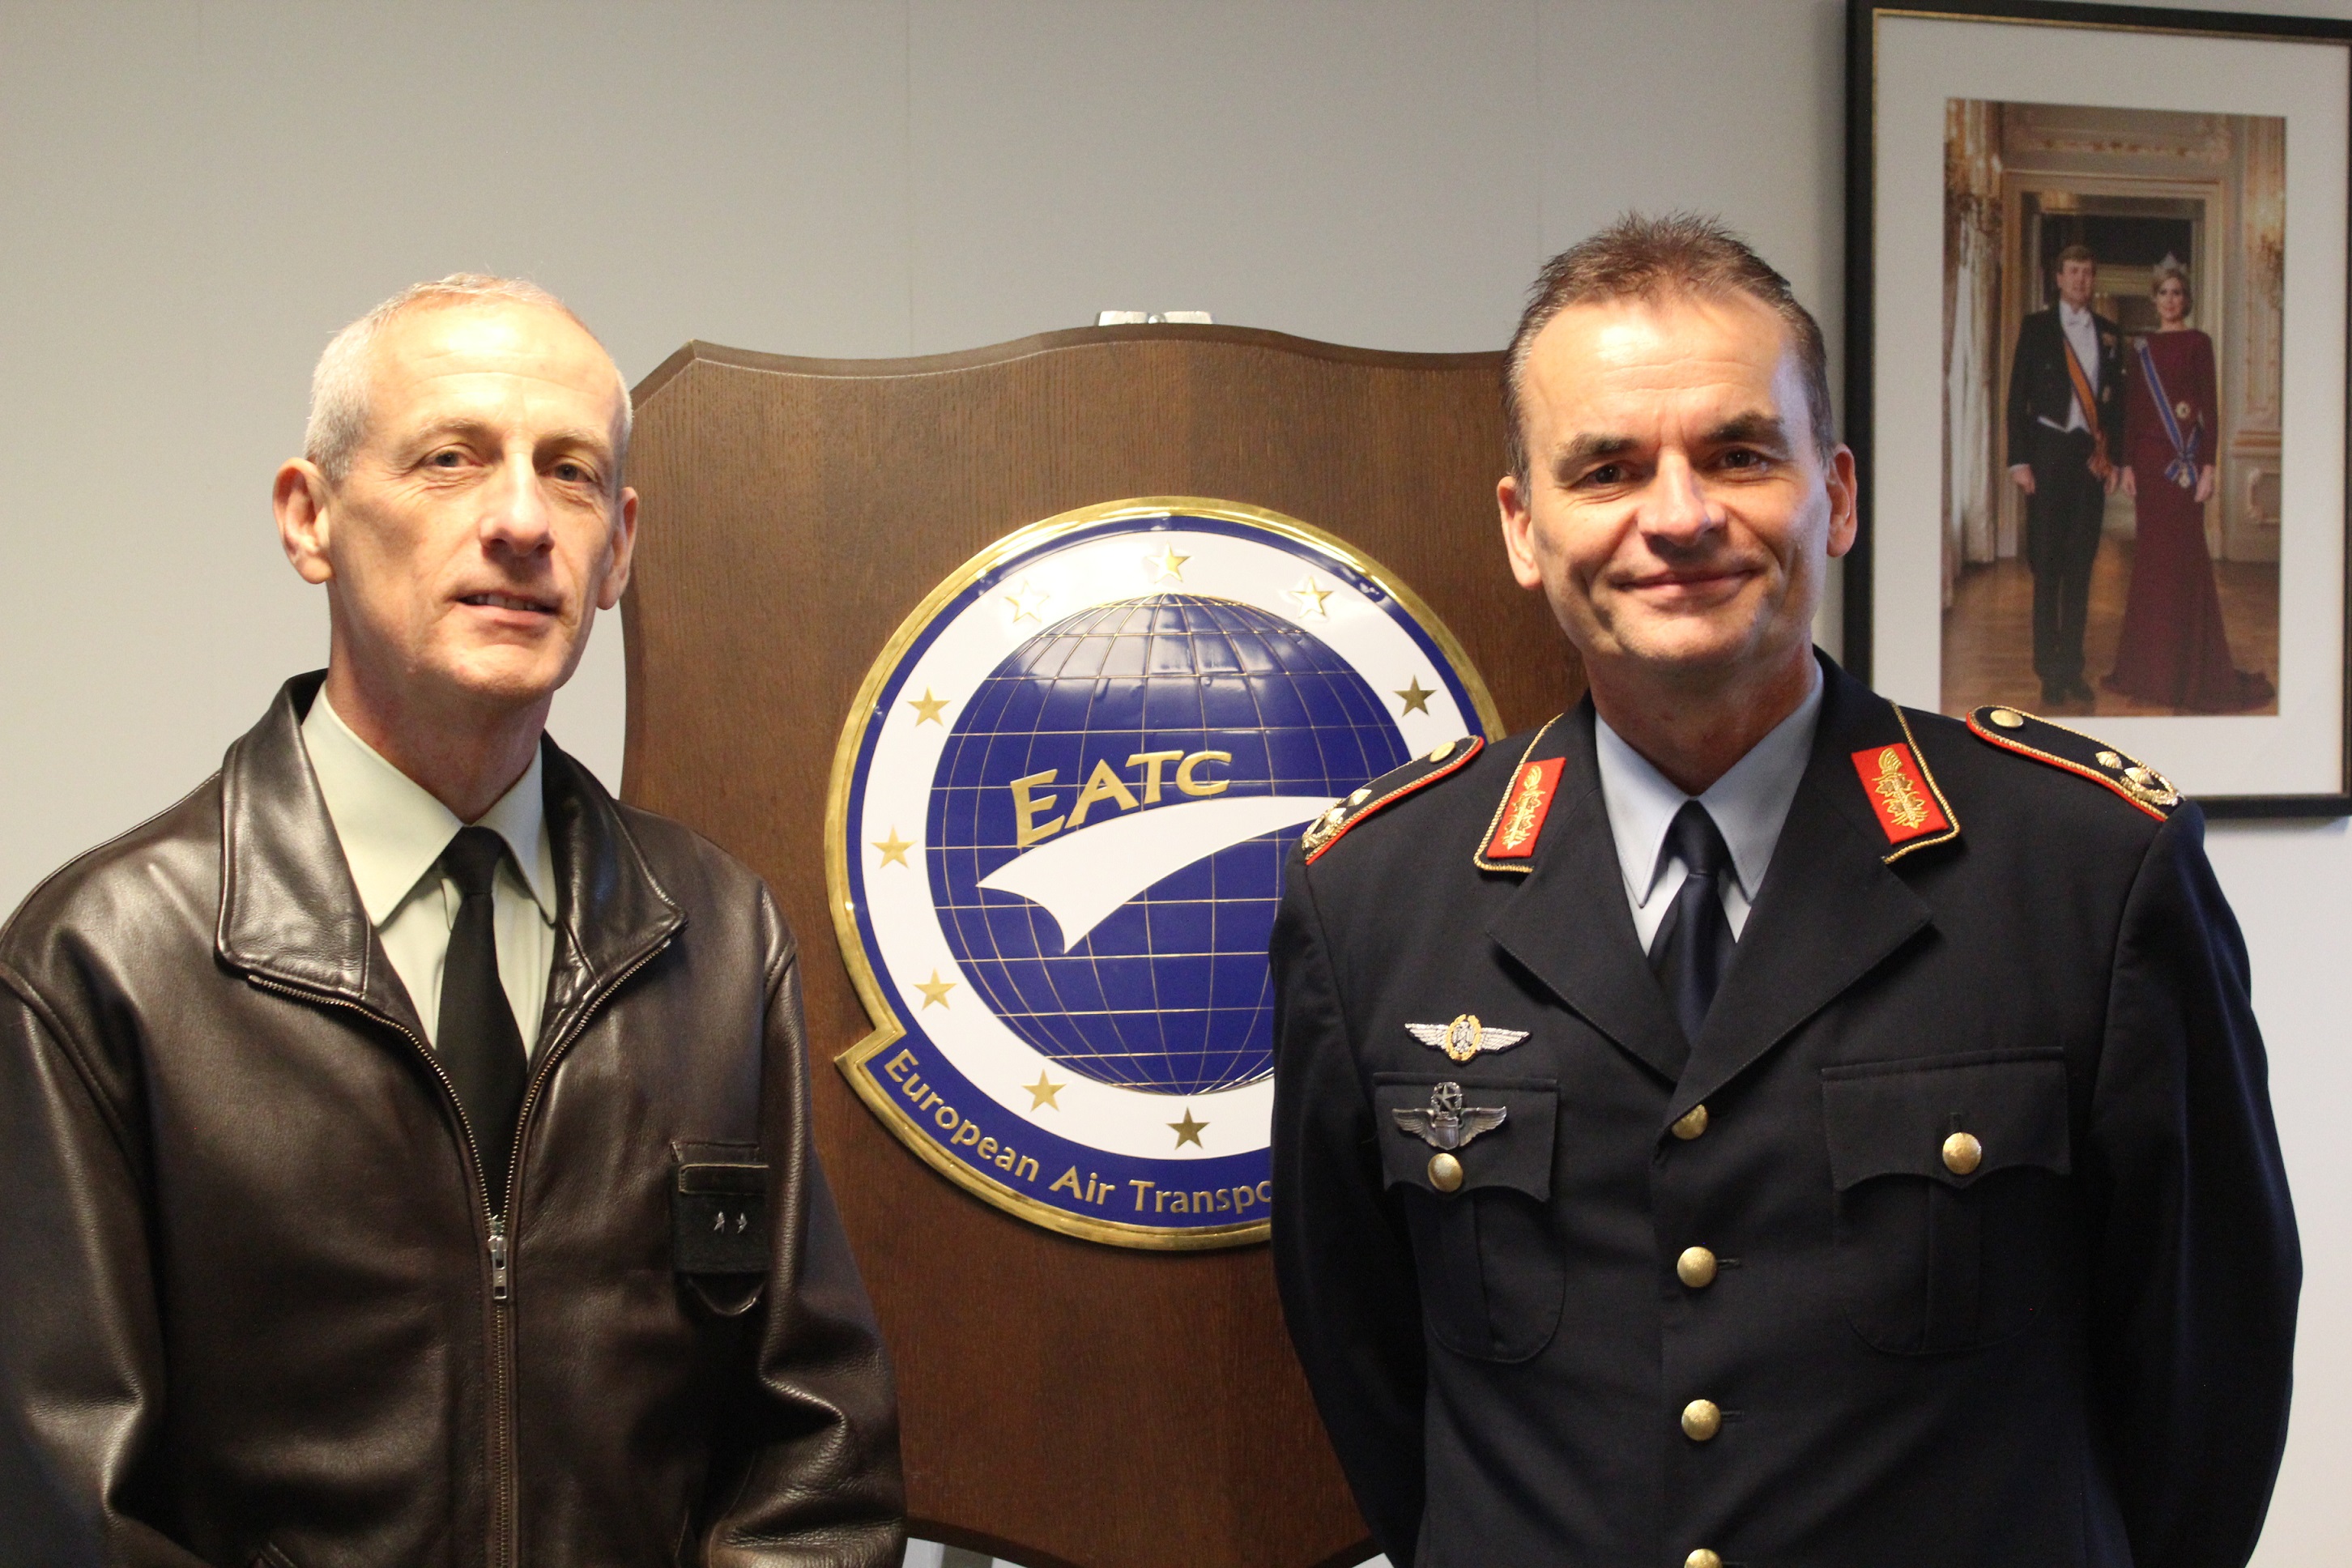 French Commander of the Joint Logistics Support Operations and Movement Center (CSOA) visits EATC